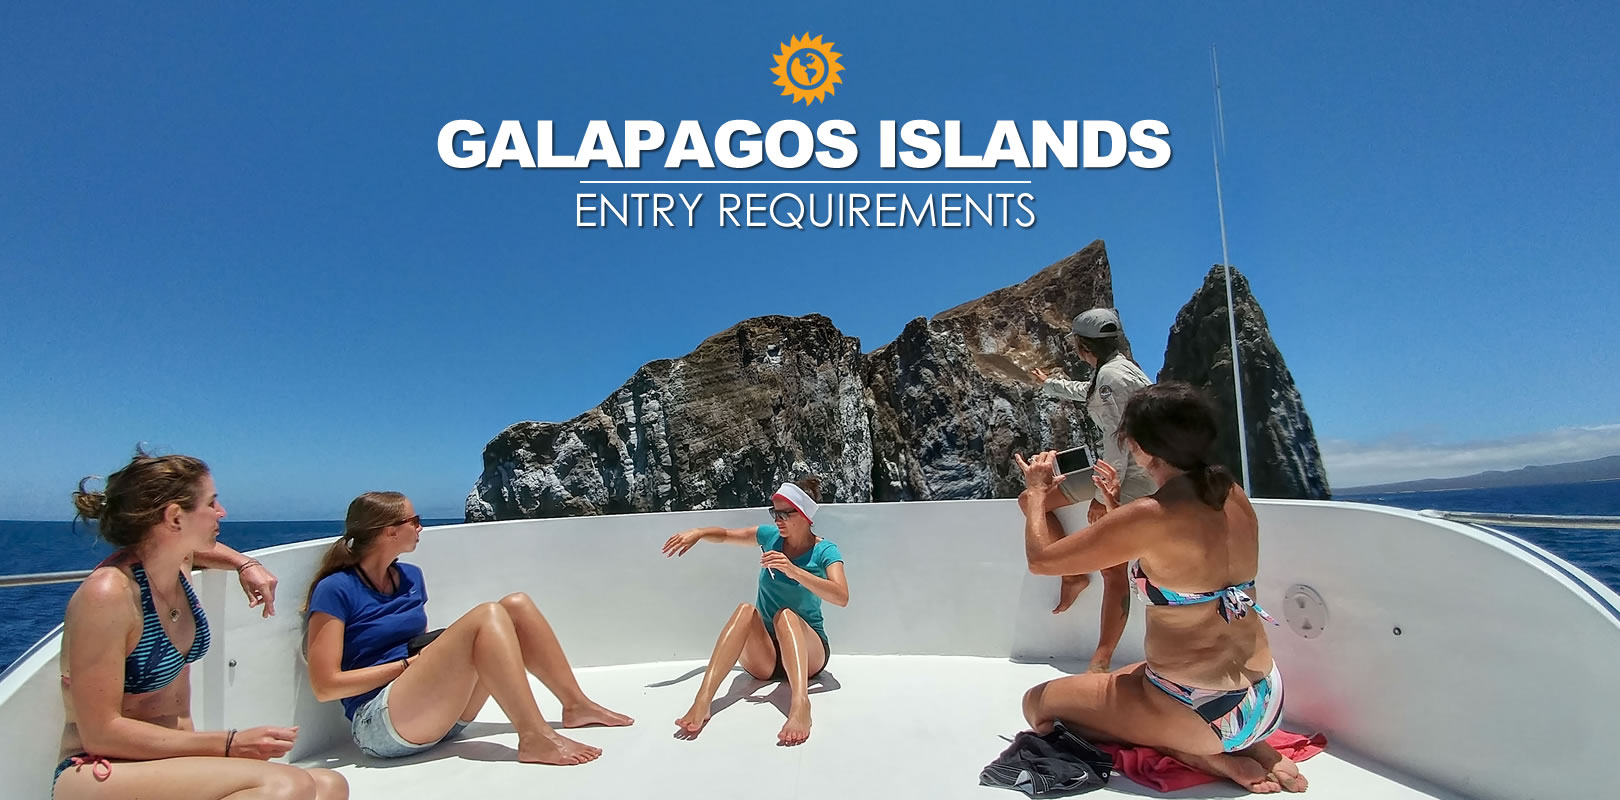 Entry requeriments to Galapagos islands 2020